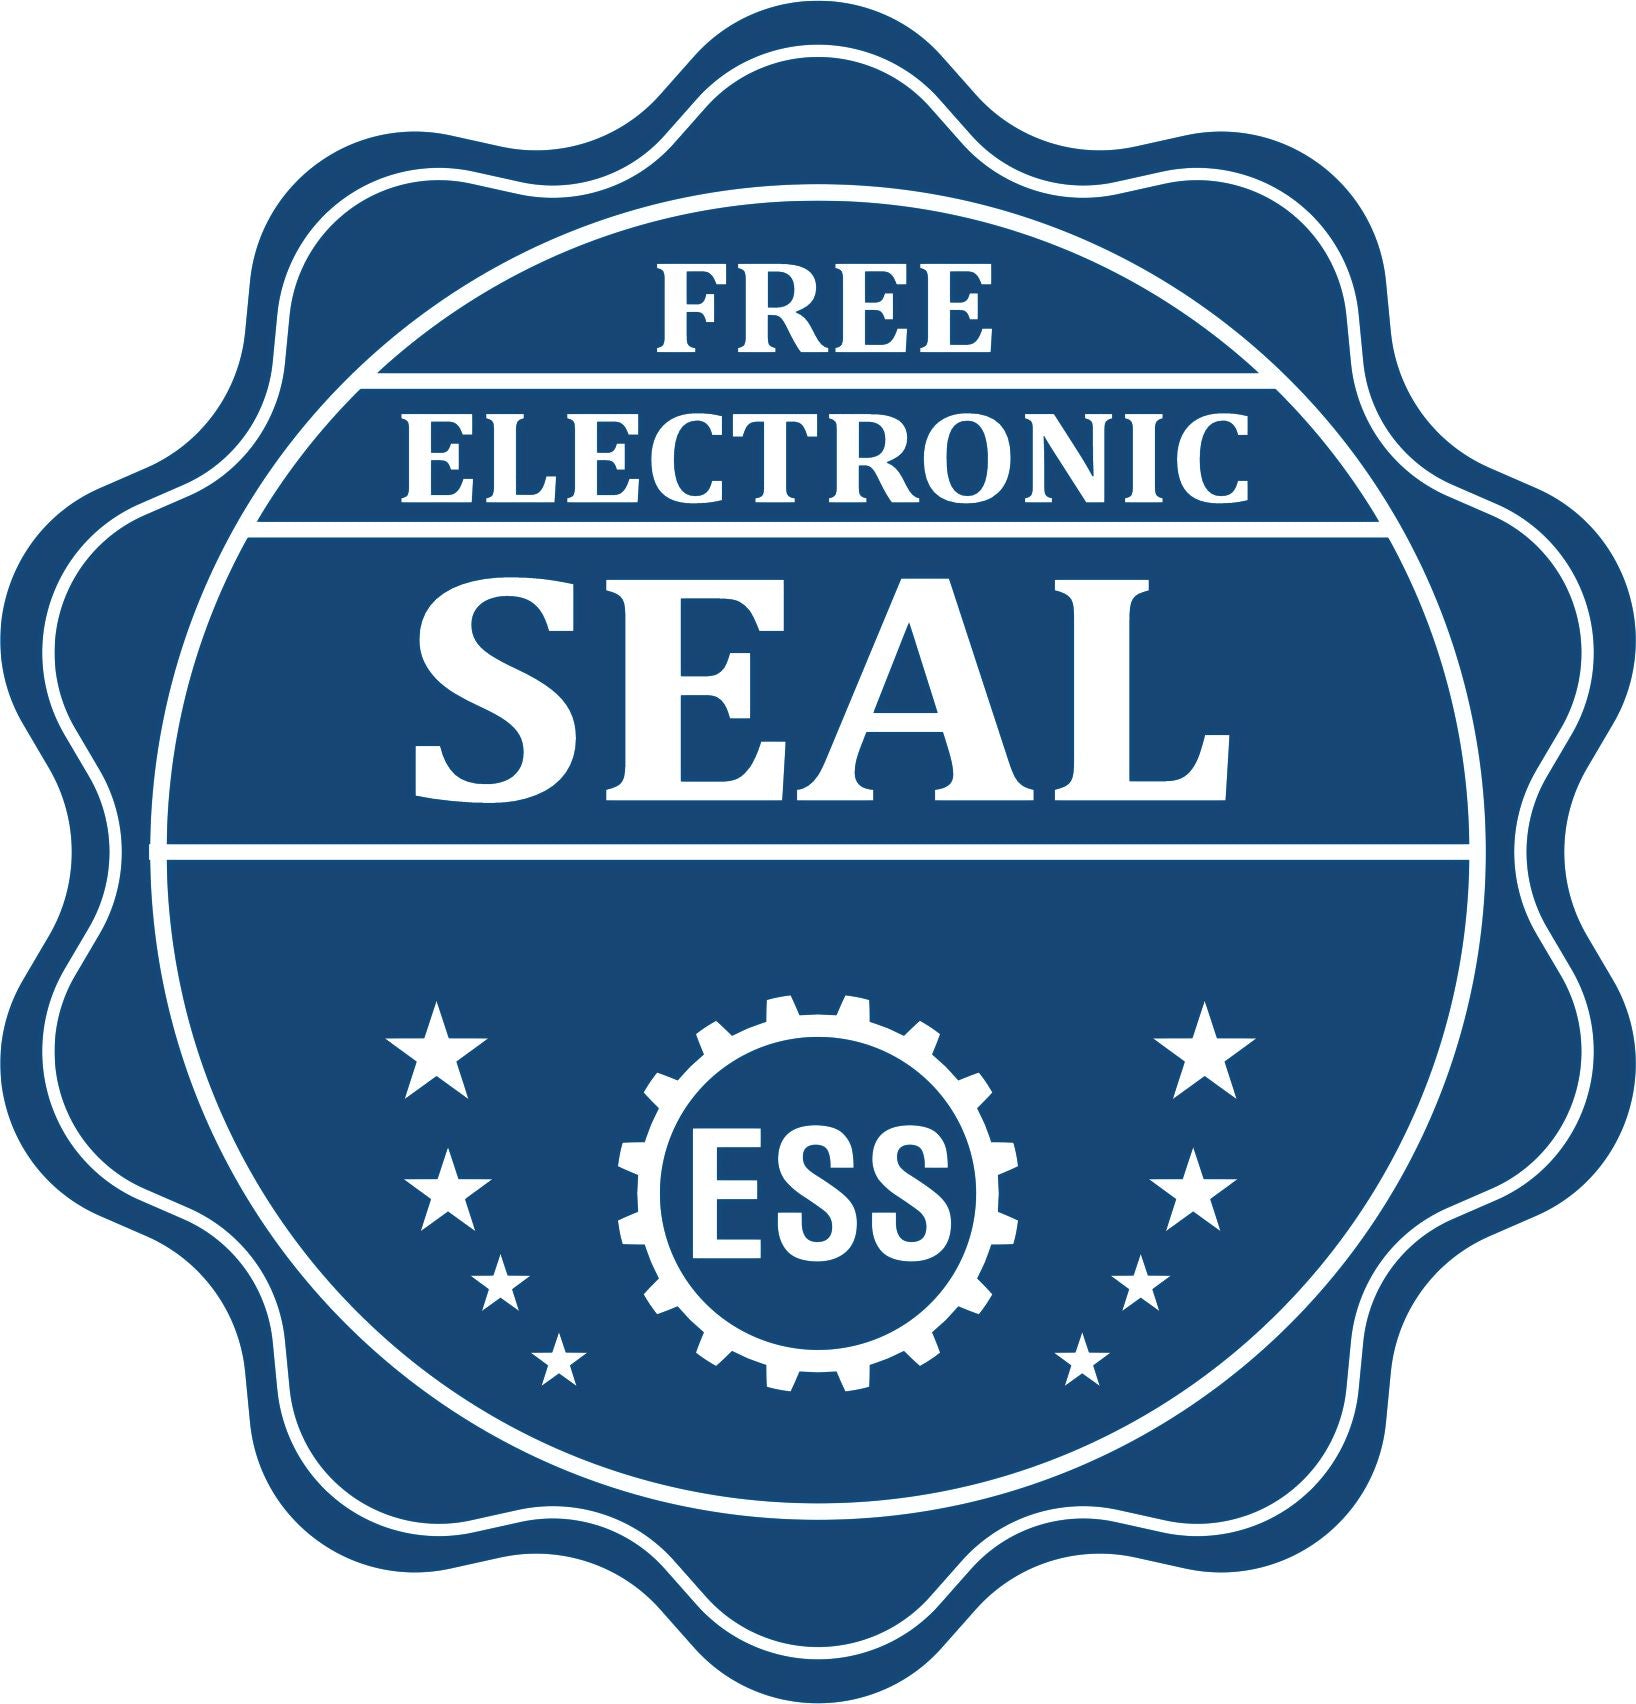 A badge showing a free electronic seal for the Long Reach Illinois PE Seal with stars and the ESS gear on the emblem.